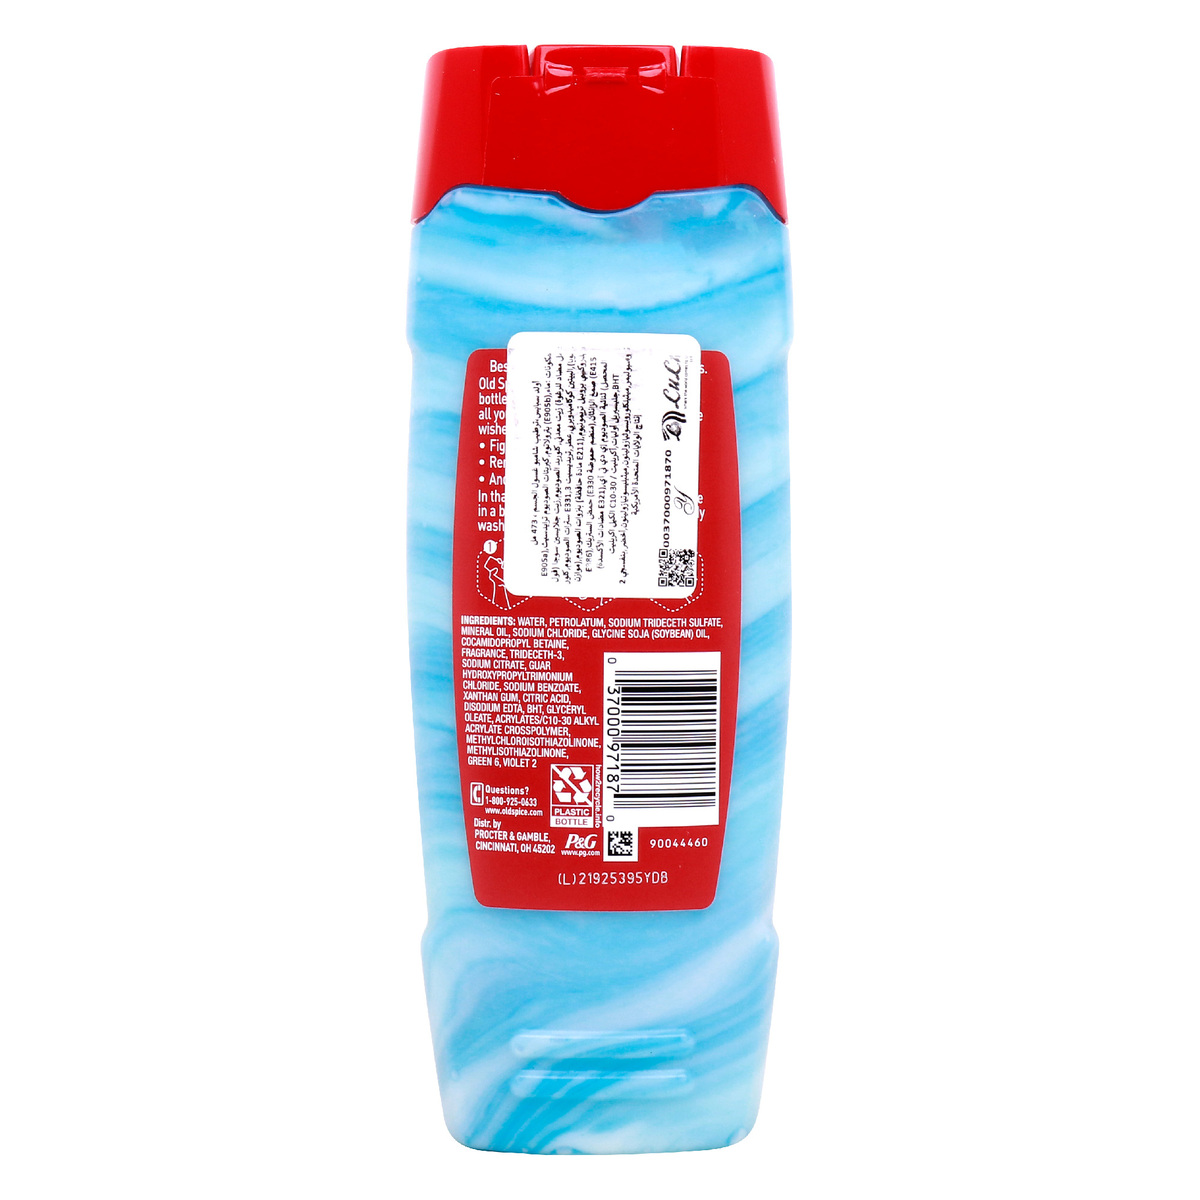 Old Spice Steel Courage Hydro Wash 473 ml